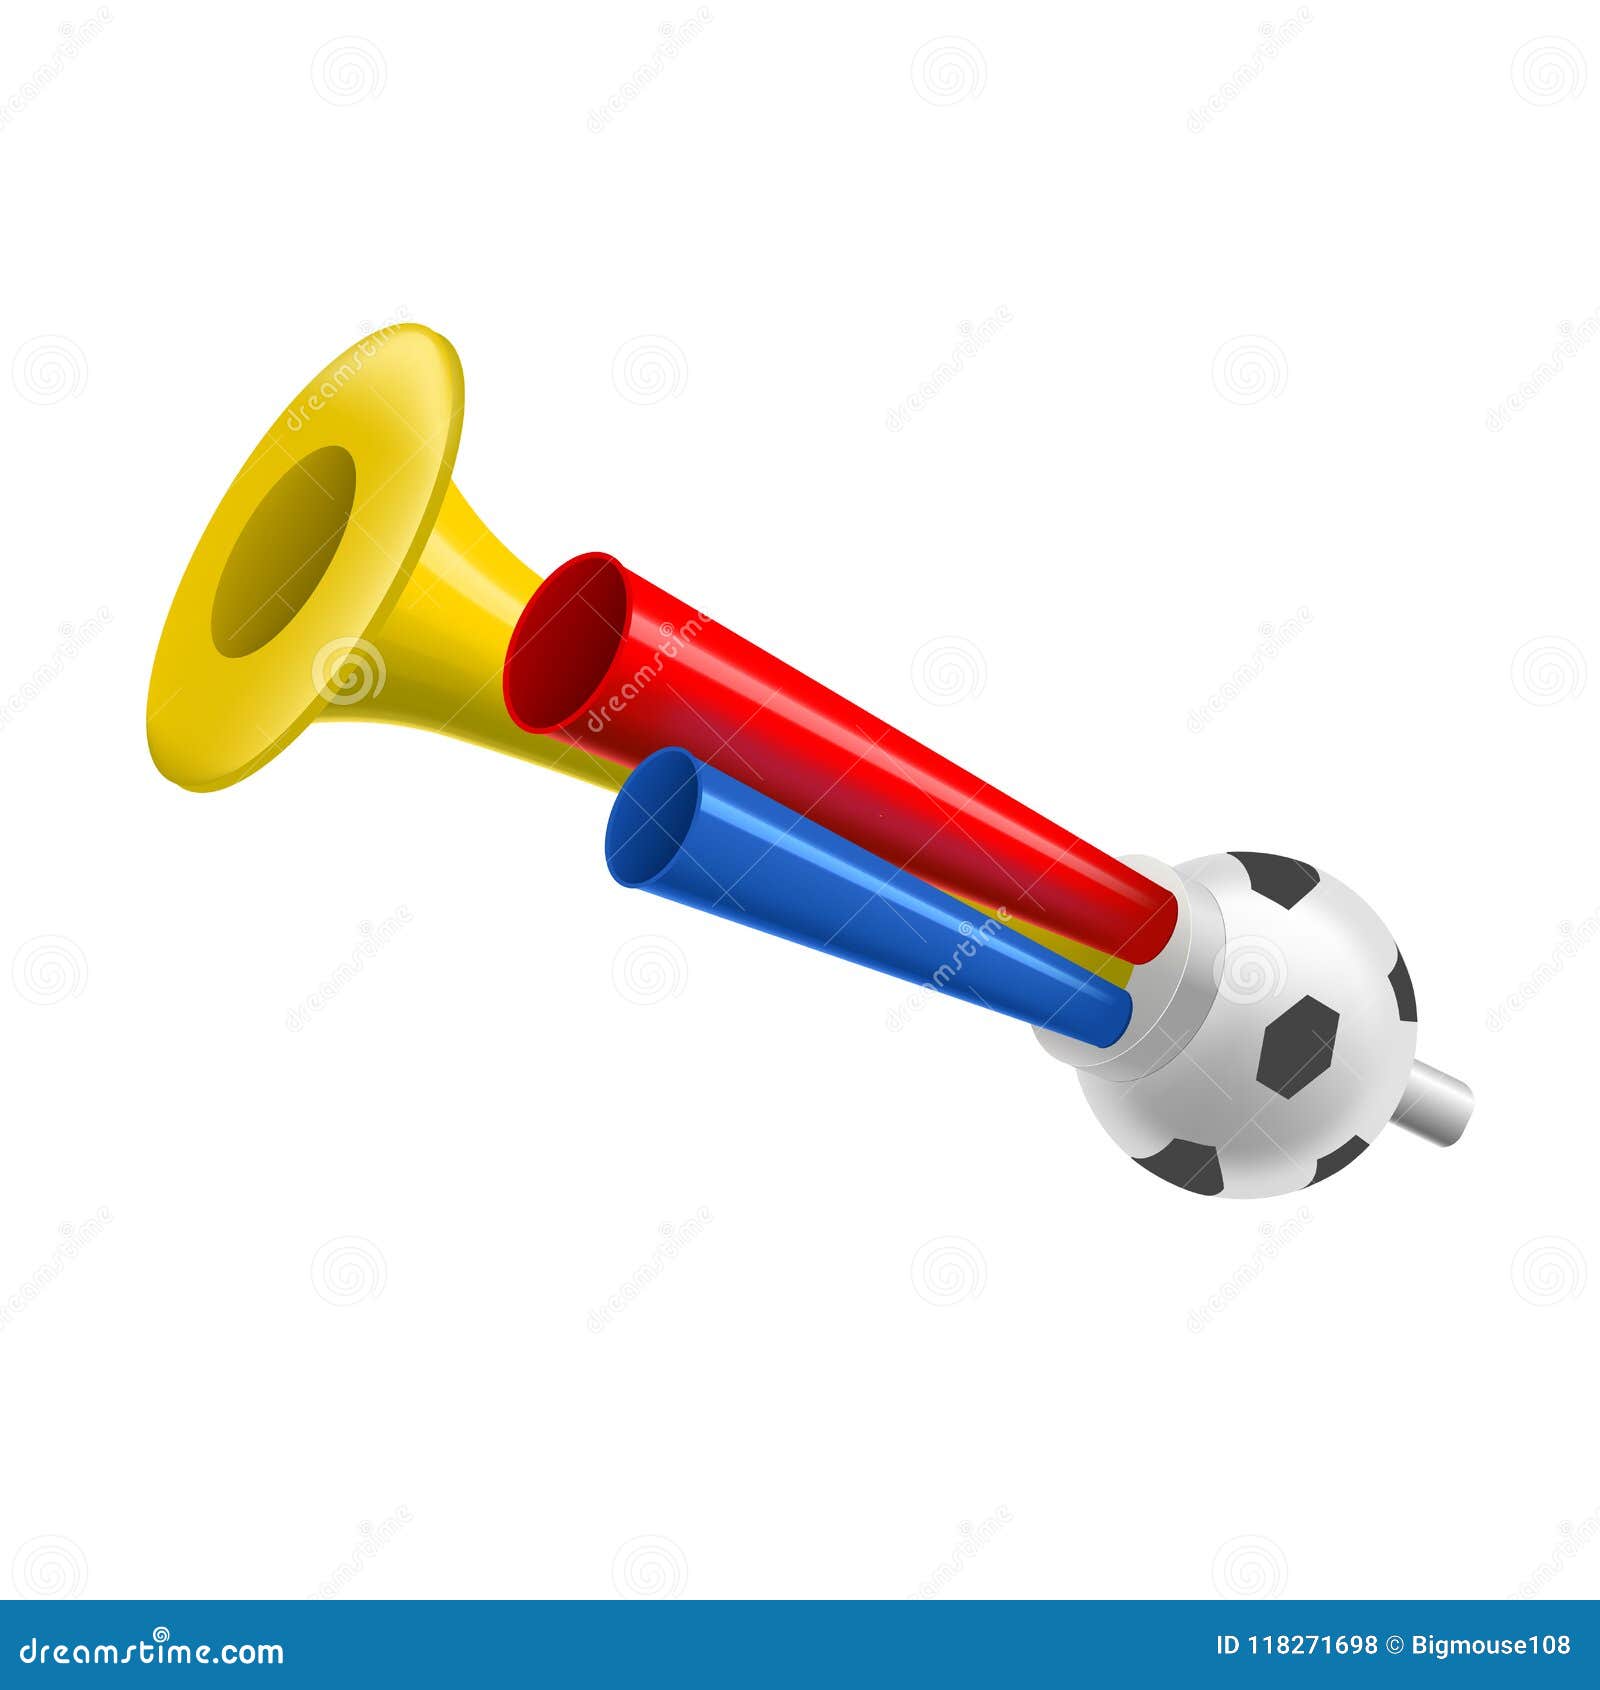 https://thumbs.dreamstime.com/z/realistic-detailed-d-trumpets-football-fan-vector-realistic-detailed-d-trumpets-football-fan-soccer-game-championship-element-pipe-118271698.jpg